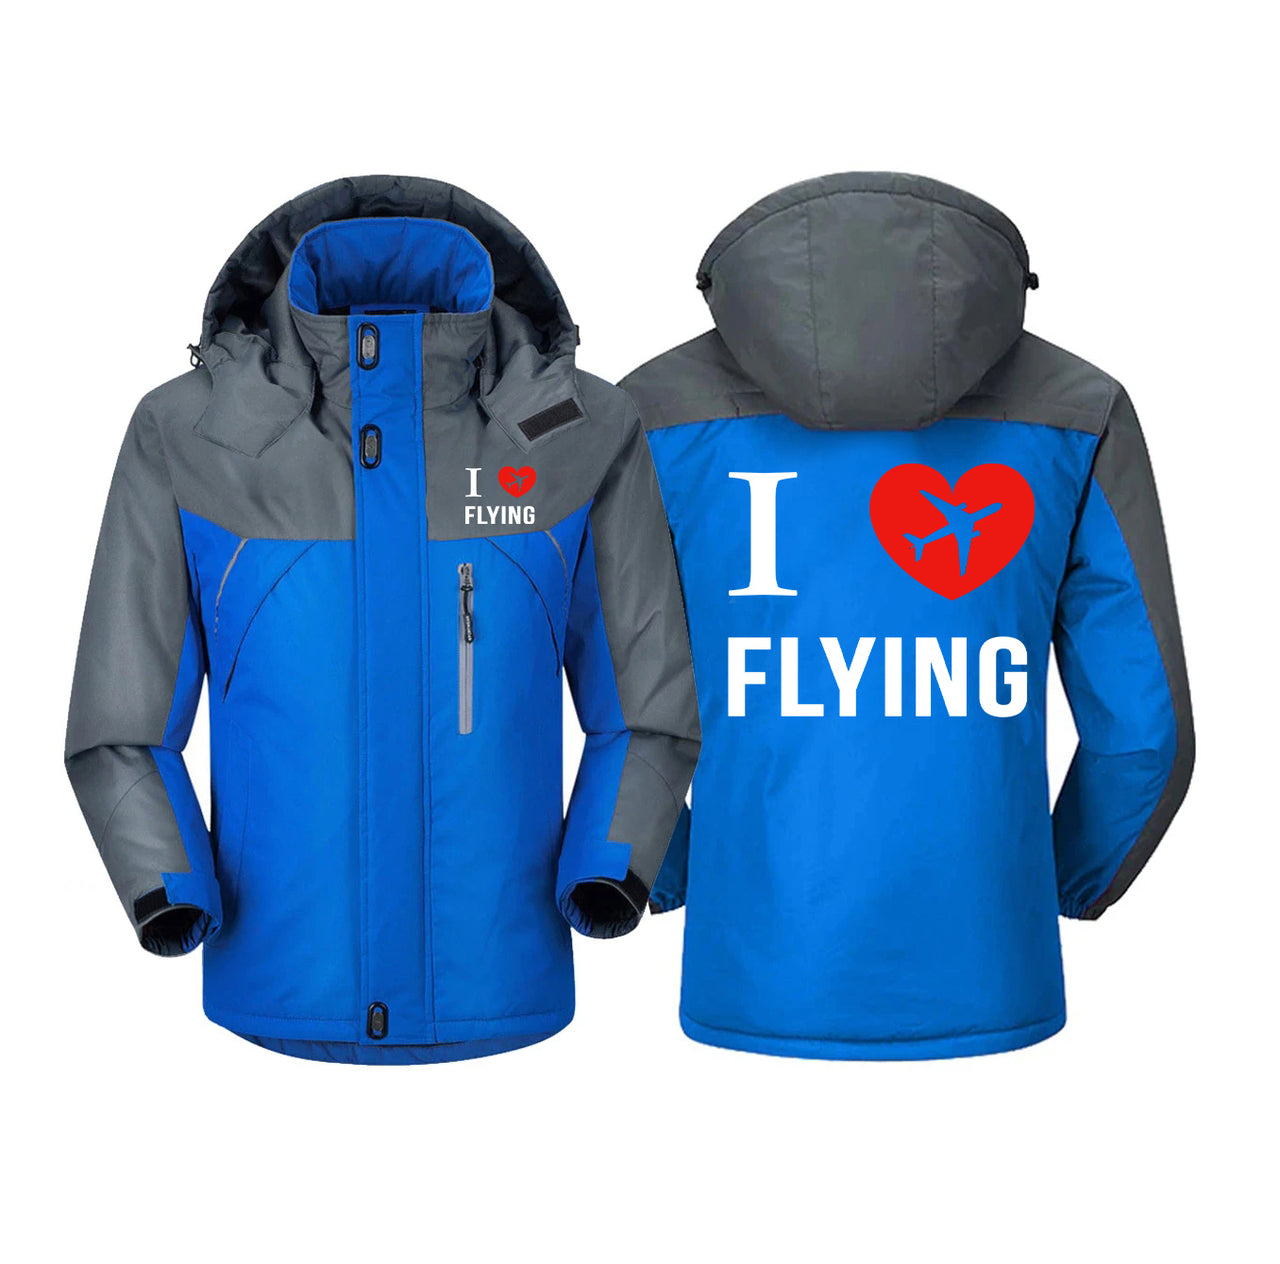 I Love Flying Designed Thick Winter Jackets